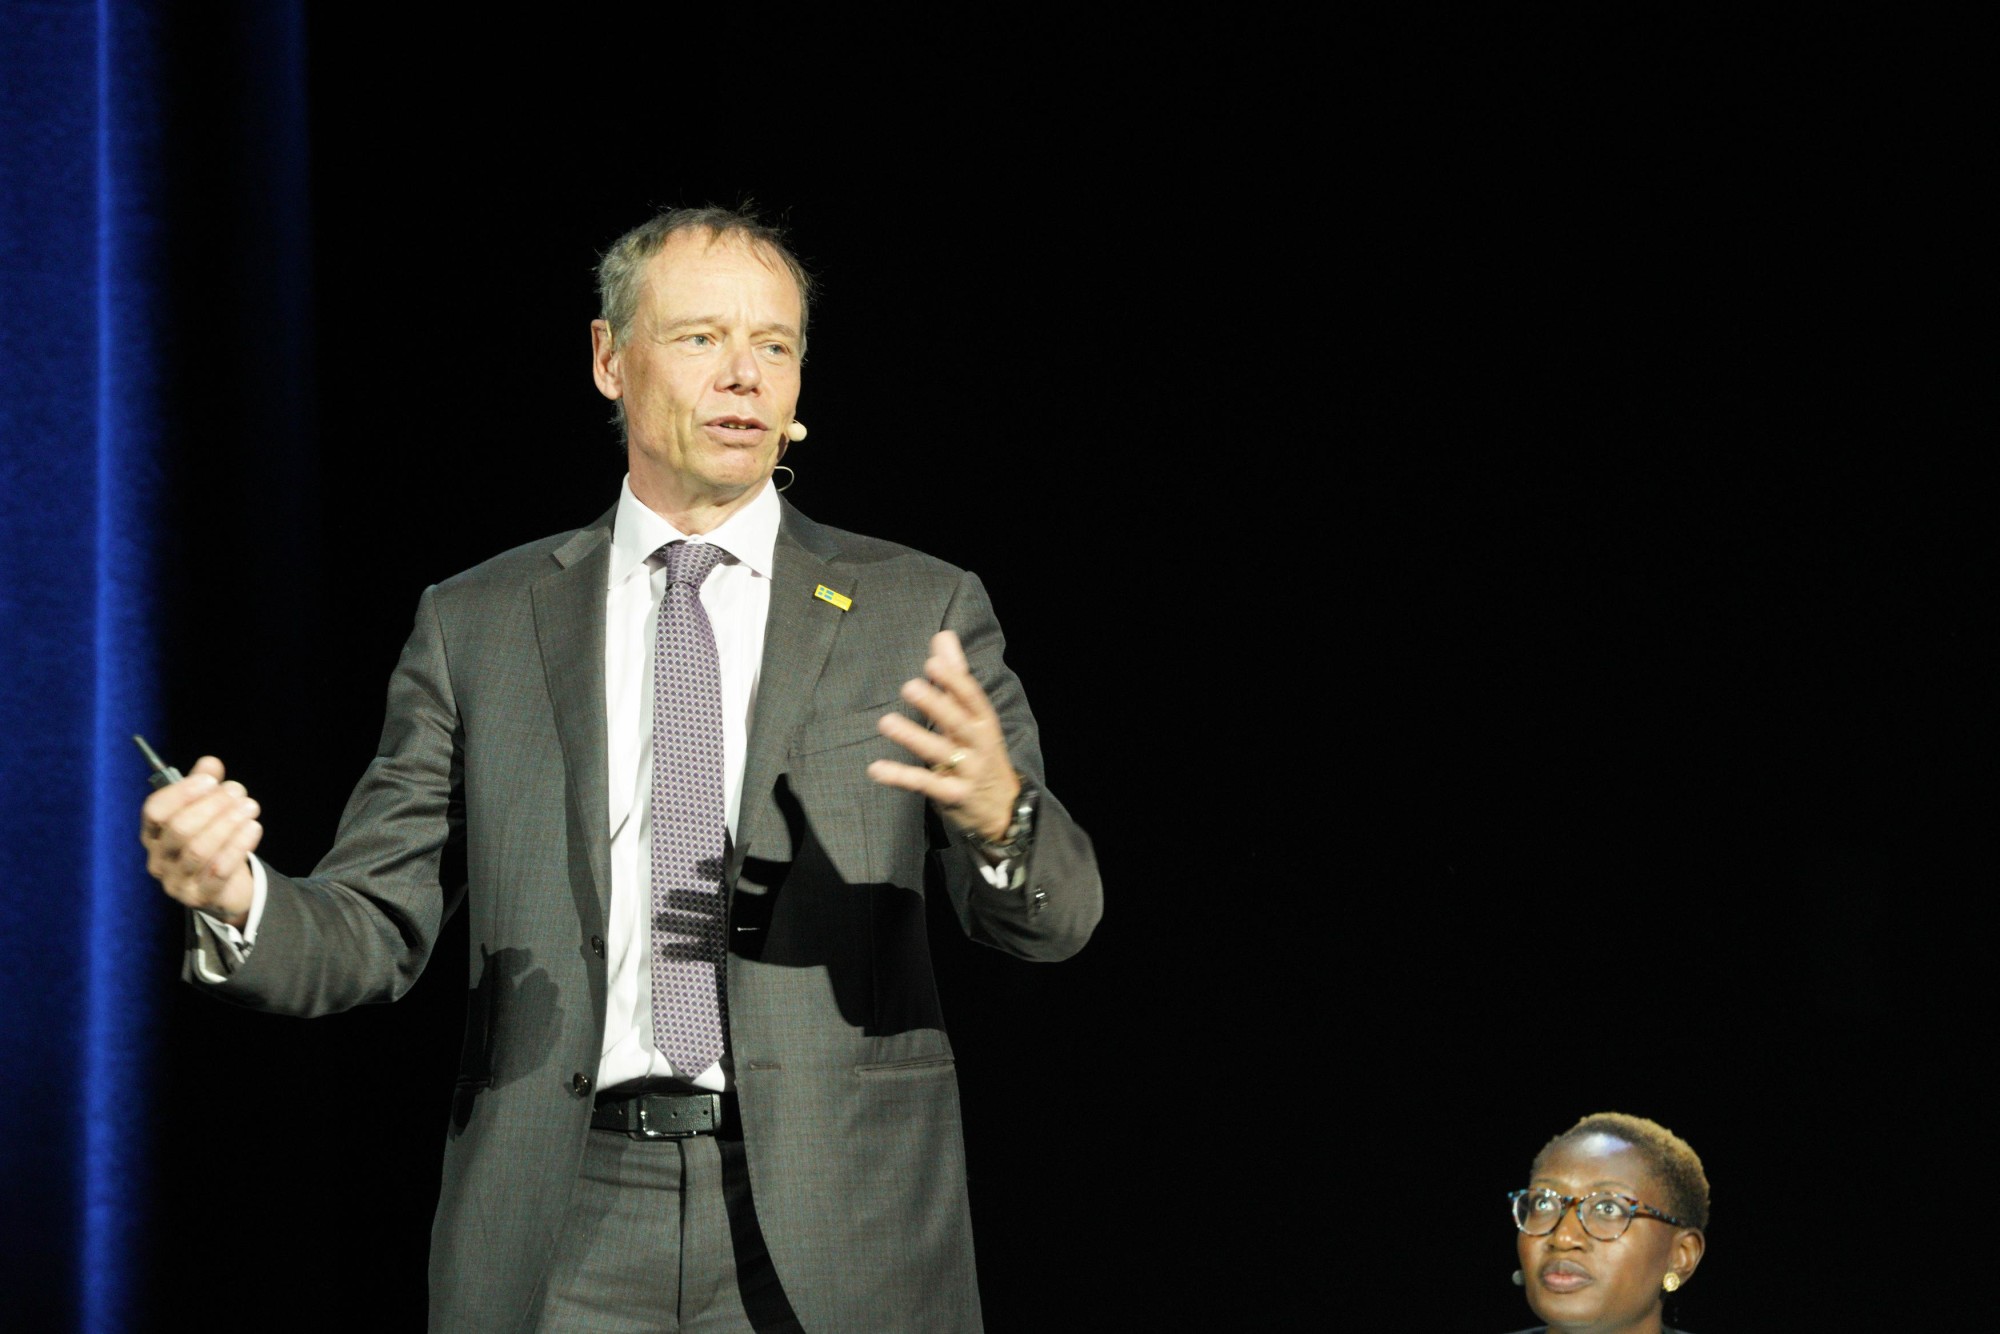 Swedish physicist and an ESA astronaut Christer Fuglesang speaks at Space Week event at Dubai Exhibition Centre Web Image m5305